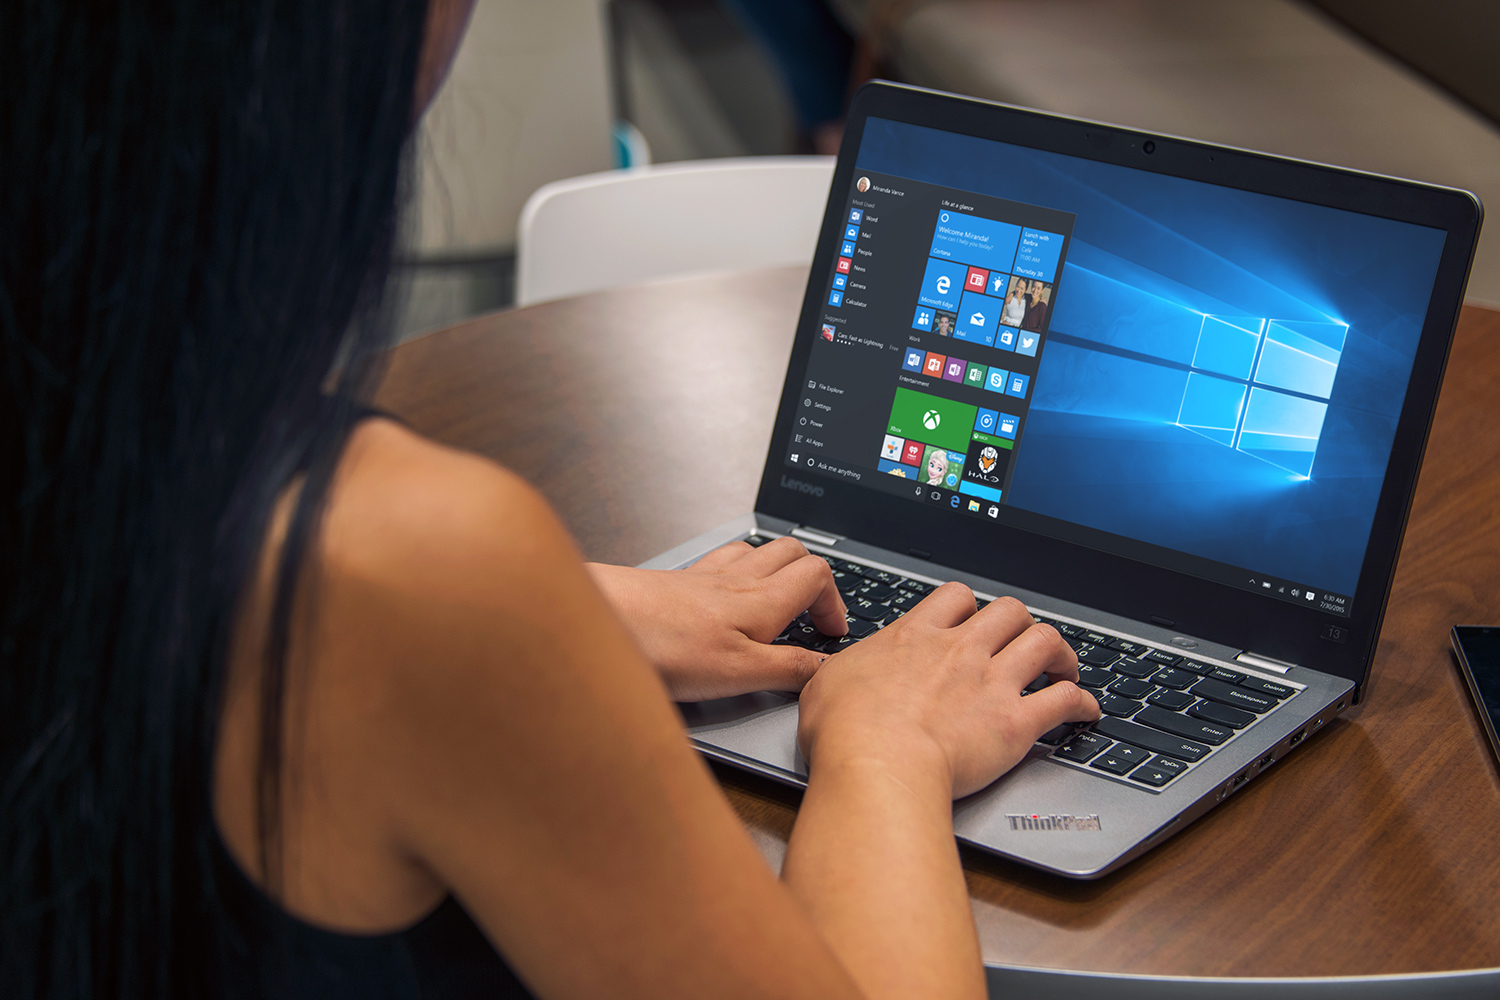 How to move Windows 10 to an SSD | Digital Trends